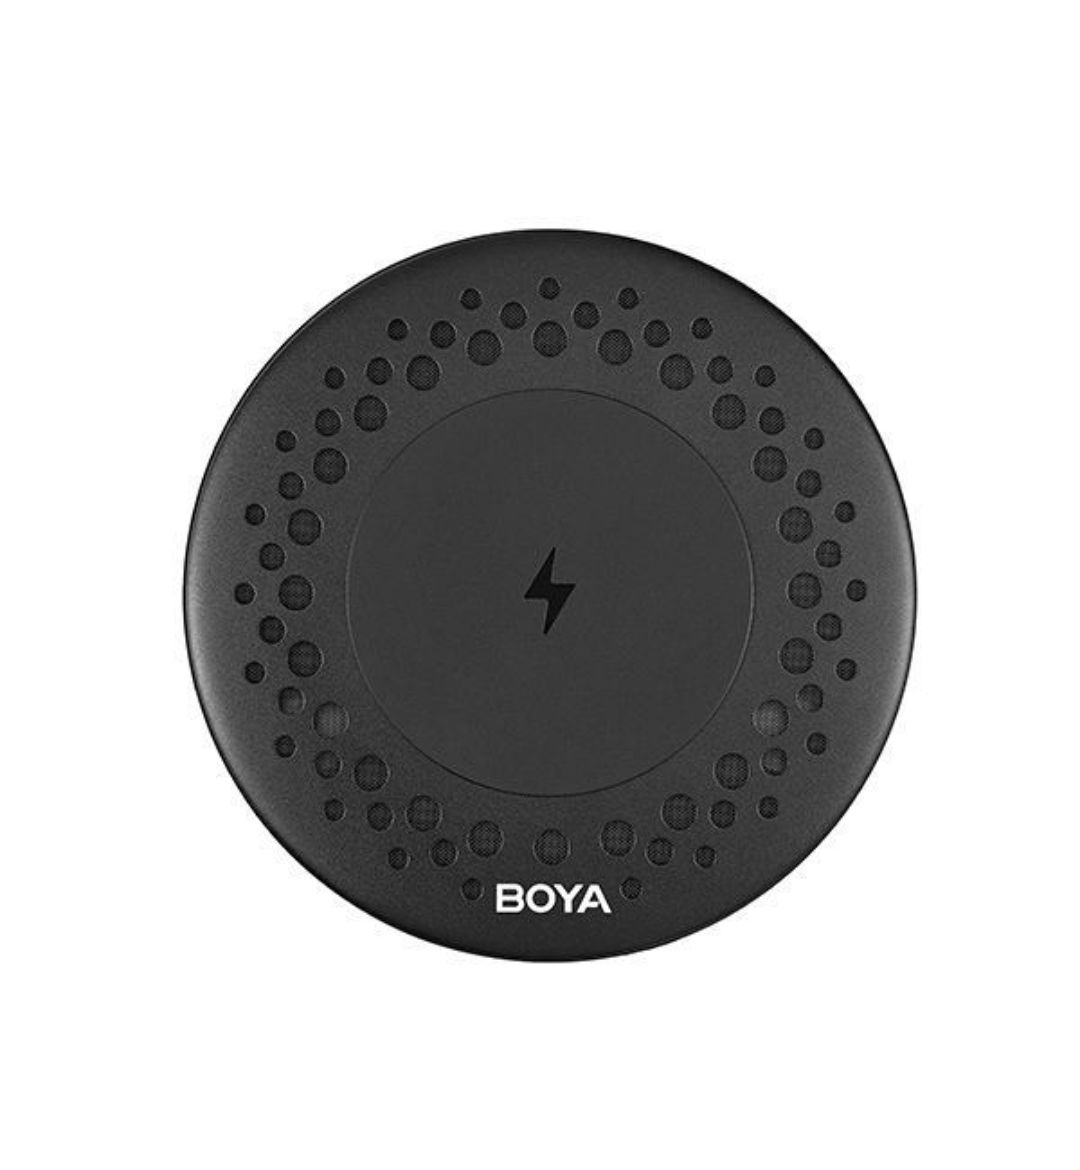 Picture of Boya Usb Conference Microphone with Wireless Charger - Black